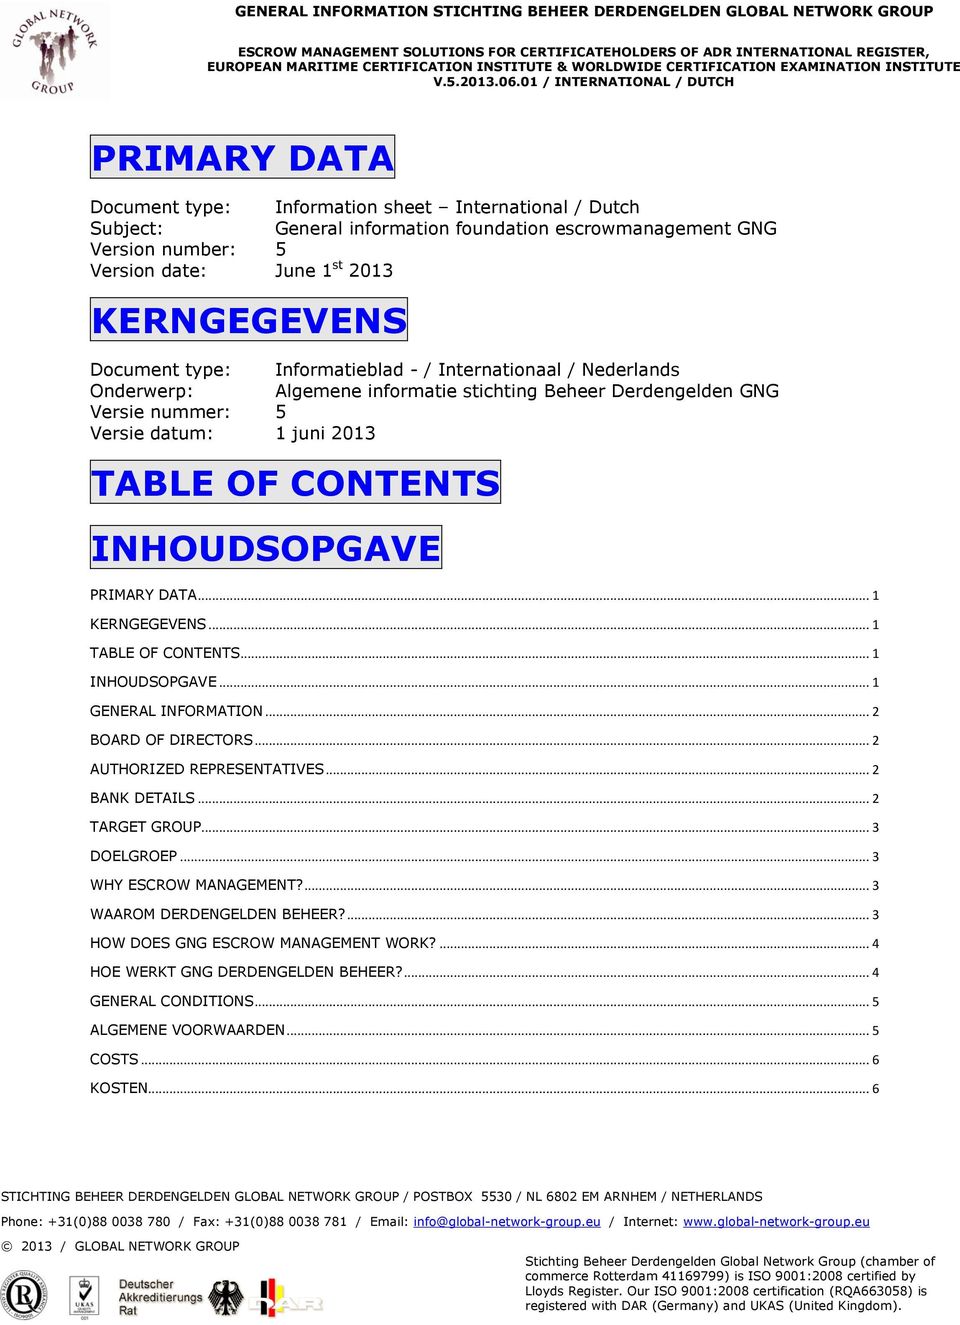 PRIMARY DATA... 1 KERNGEGEVENS... 1 TABLE OF CONTENTS... 1 INHOUDSOPGAVE... 1 GENERAL INFORMATION... 2 BOARD OF DIRECTORS... 2 AUTHORIZED REPRESENTATIVES... 2 BANK DETAILS... 2 TARGET GROUP.